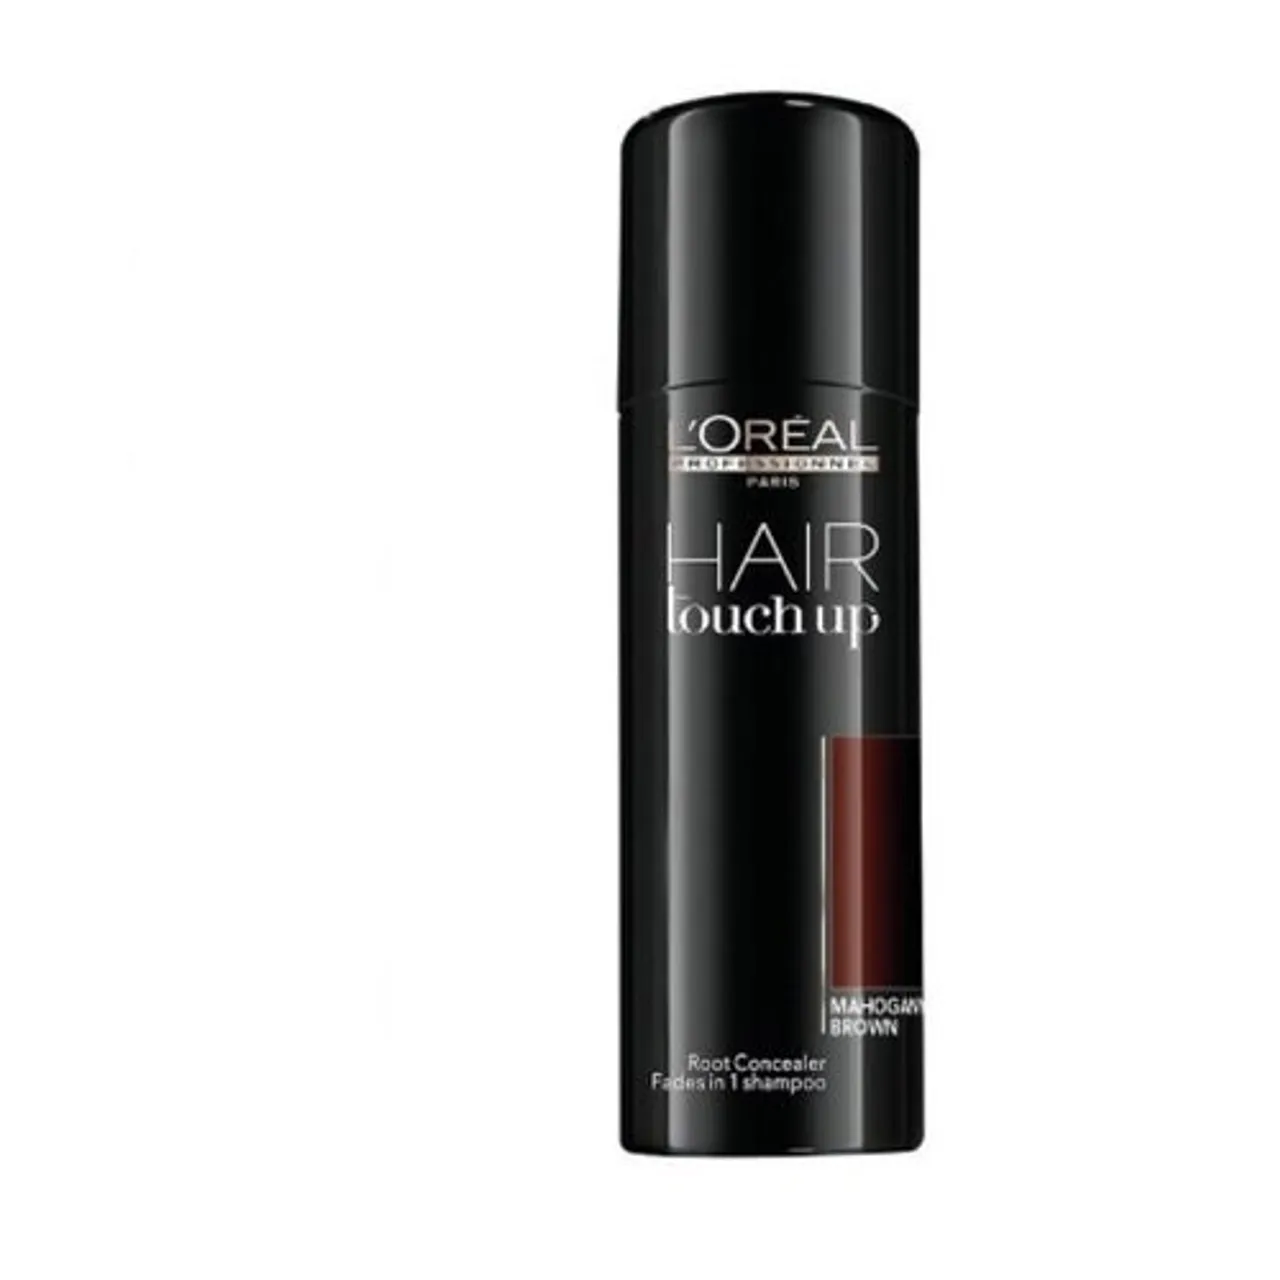 L'Oréal Professionnel Hair Touch Up Root Concealer 75 ml Mahogany Brown